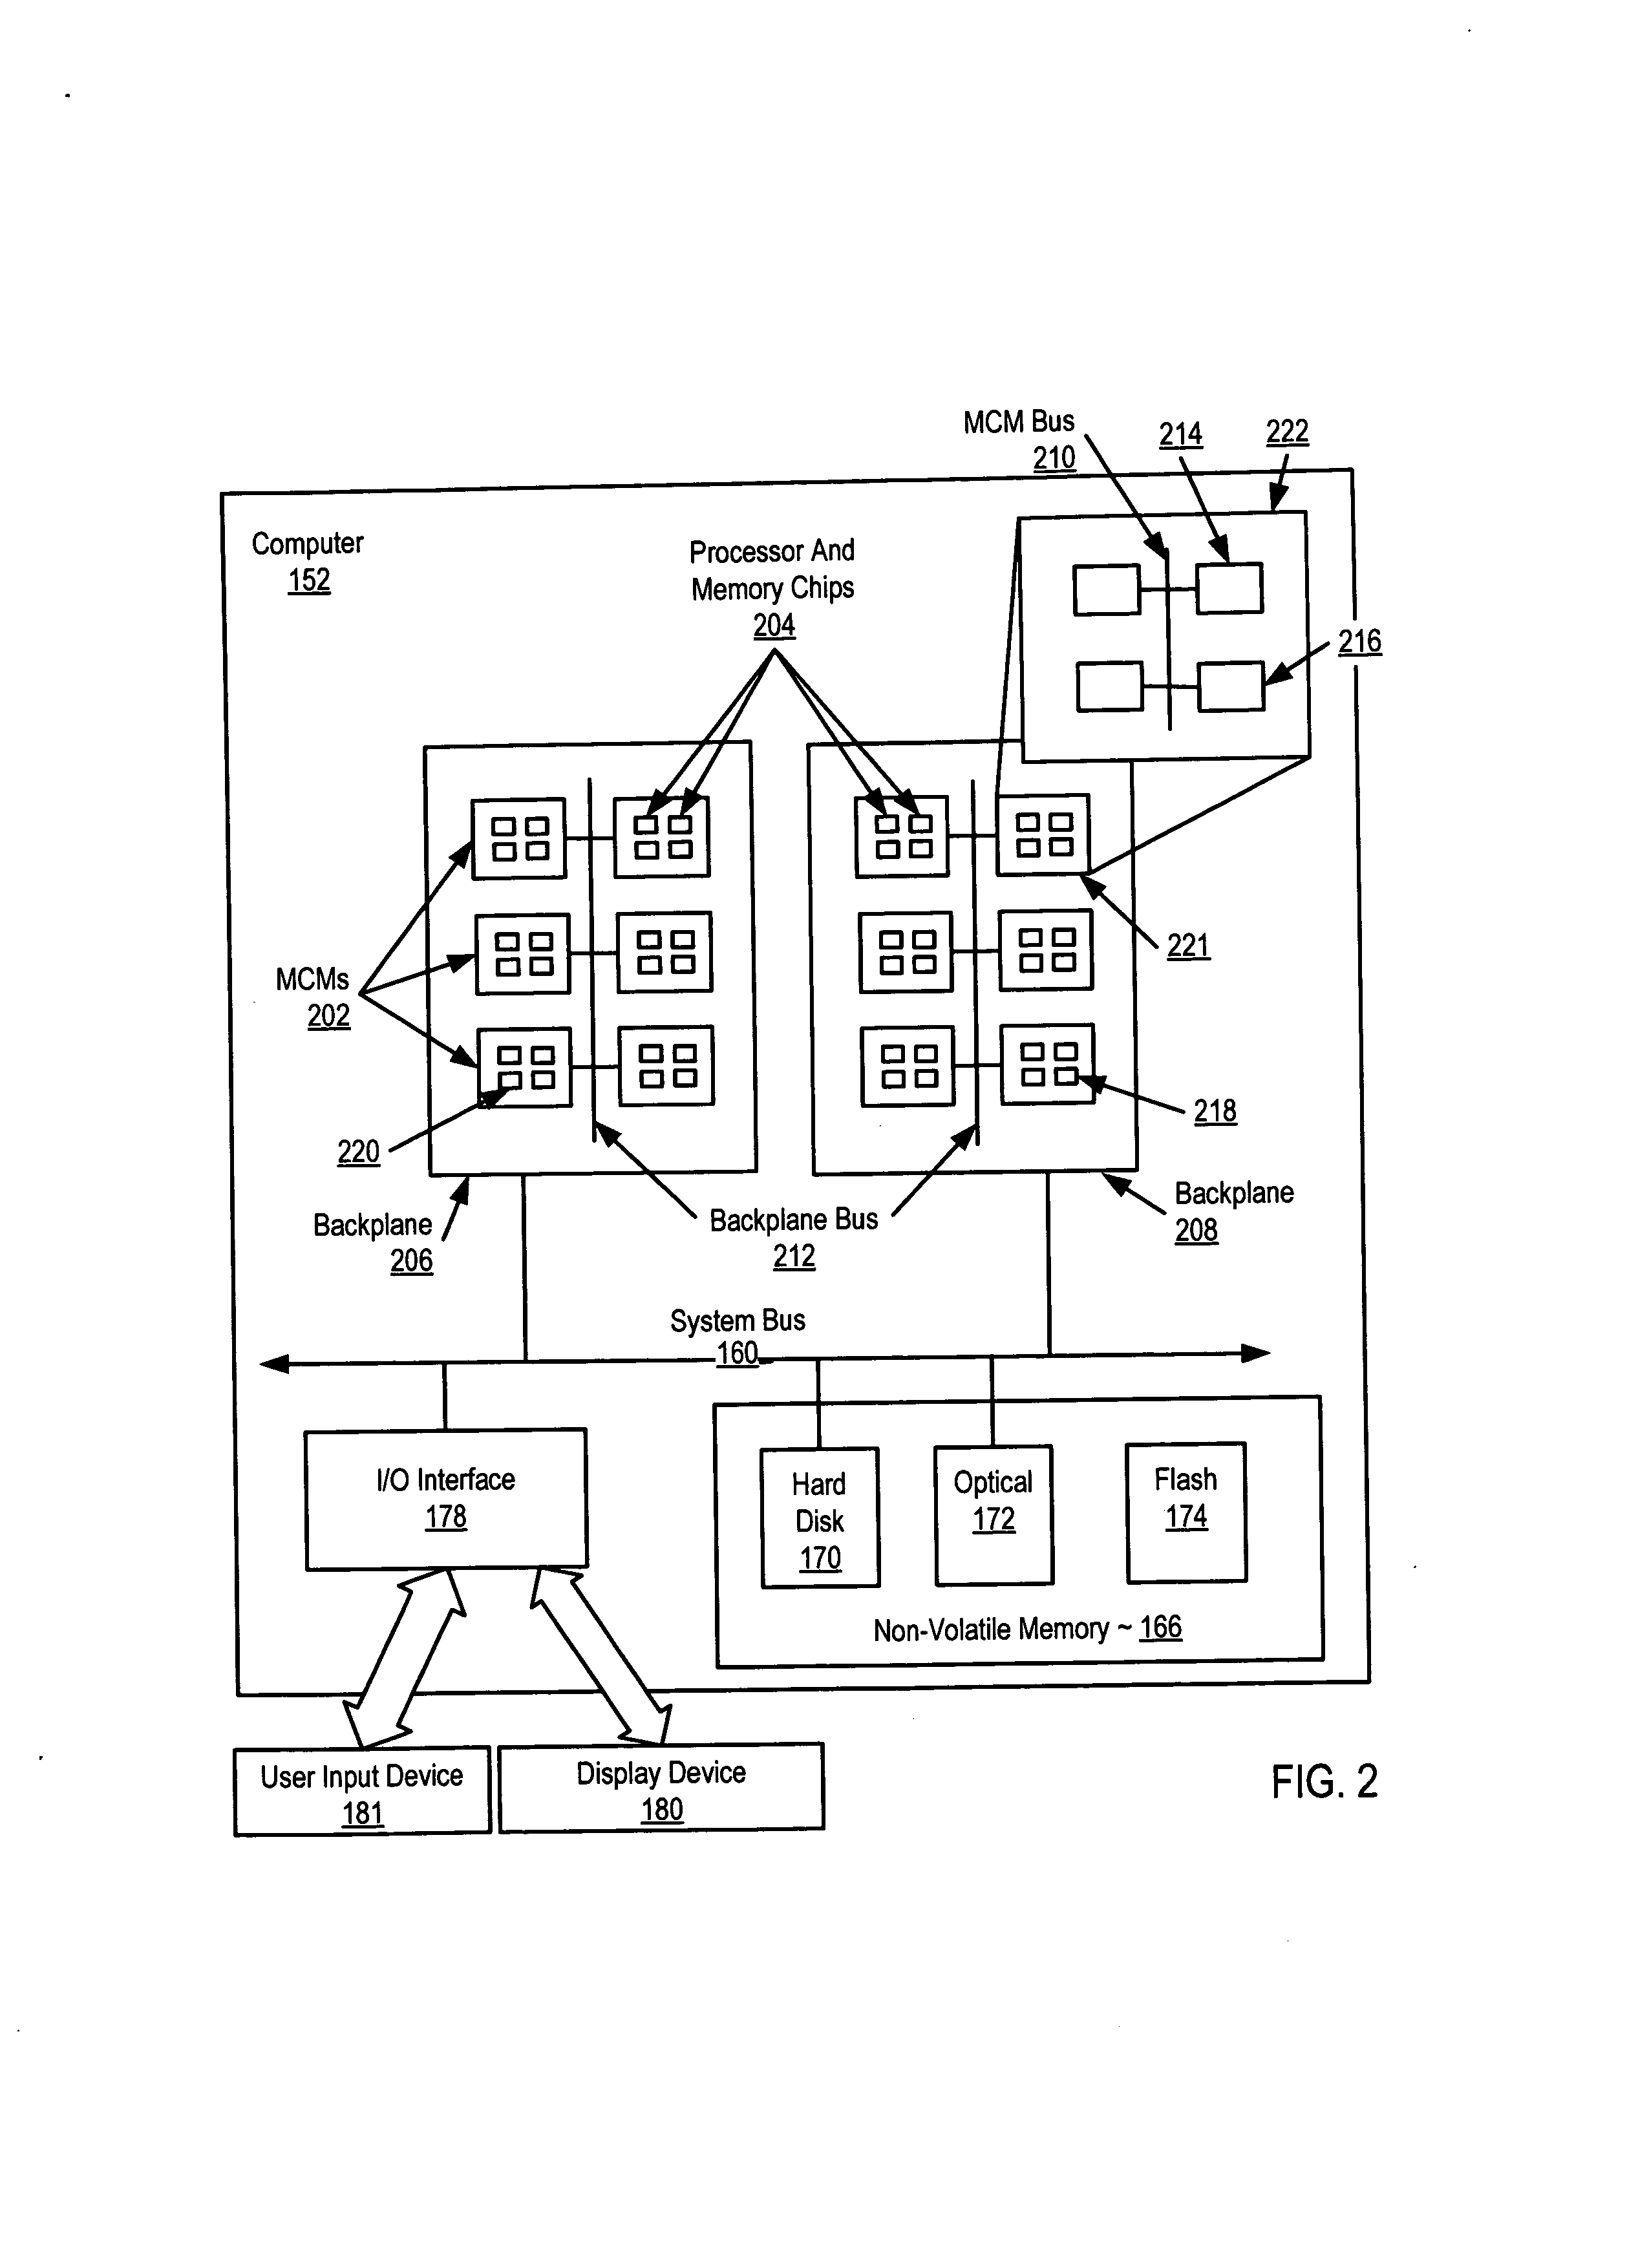 Managing computer memory in a computing environment with dynamic logical partitioning